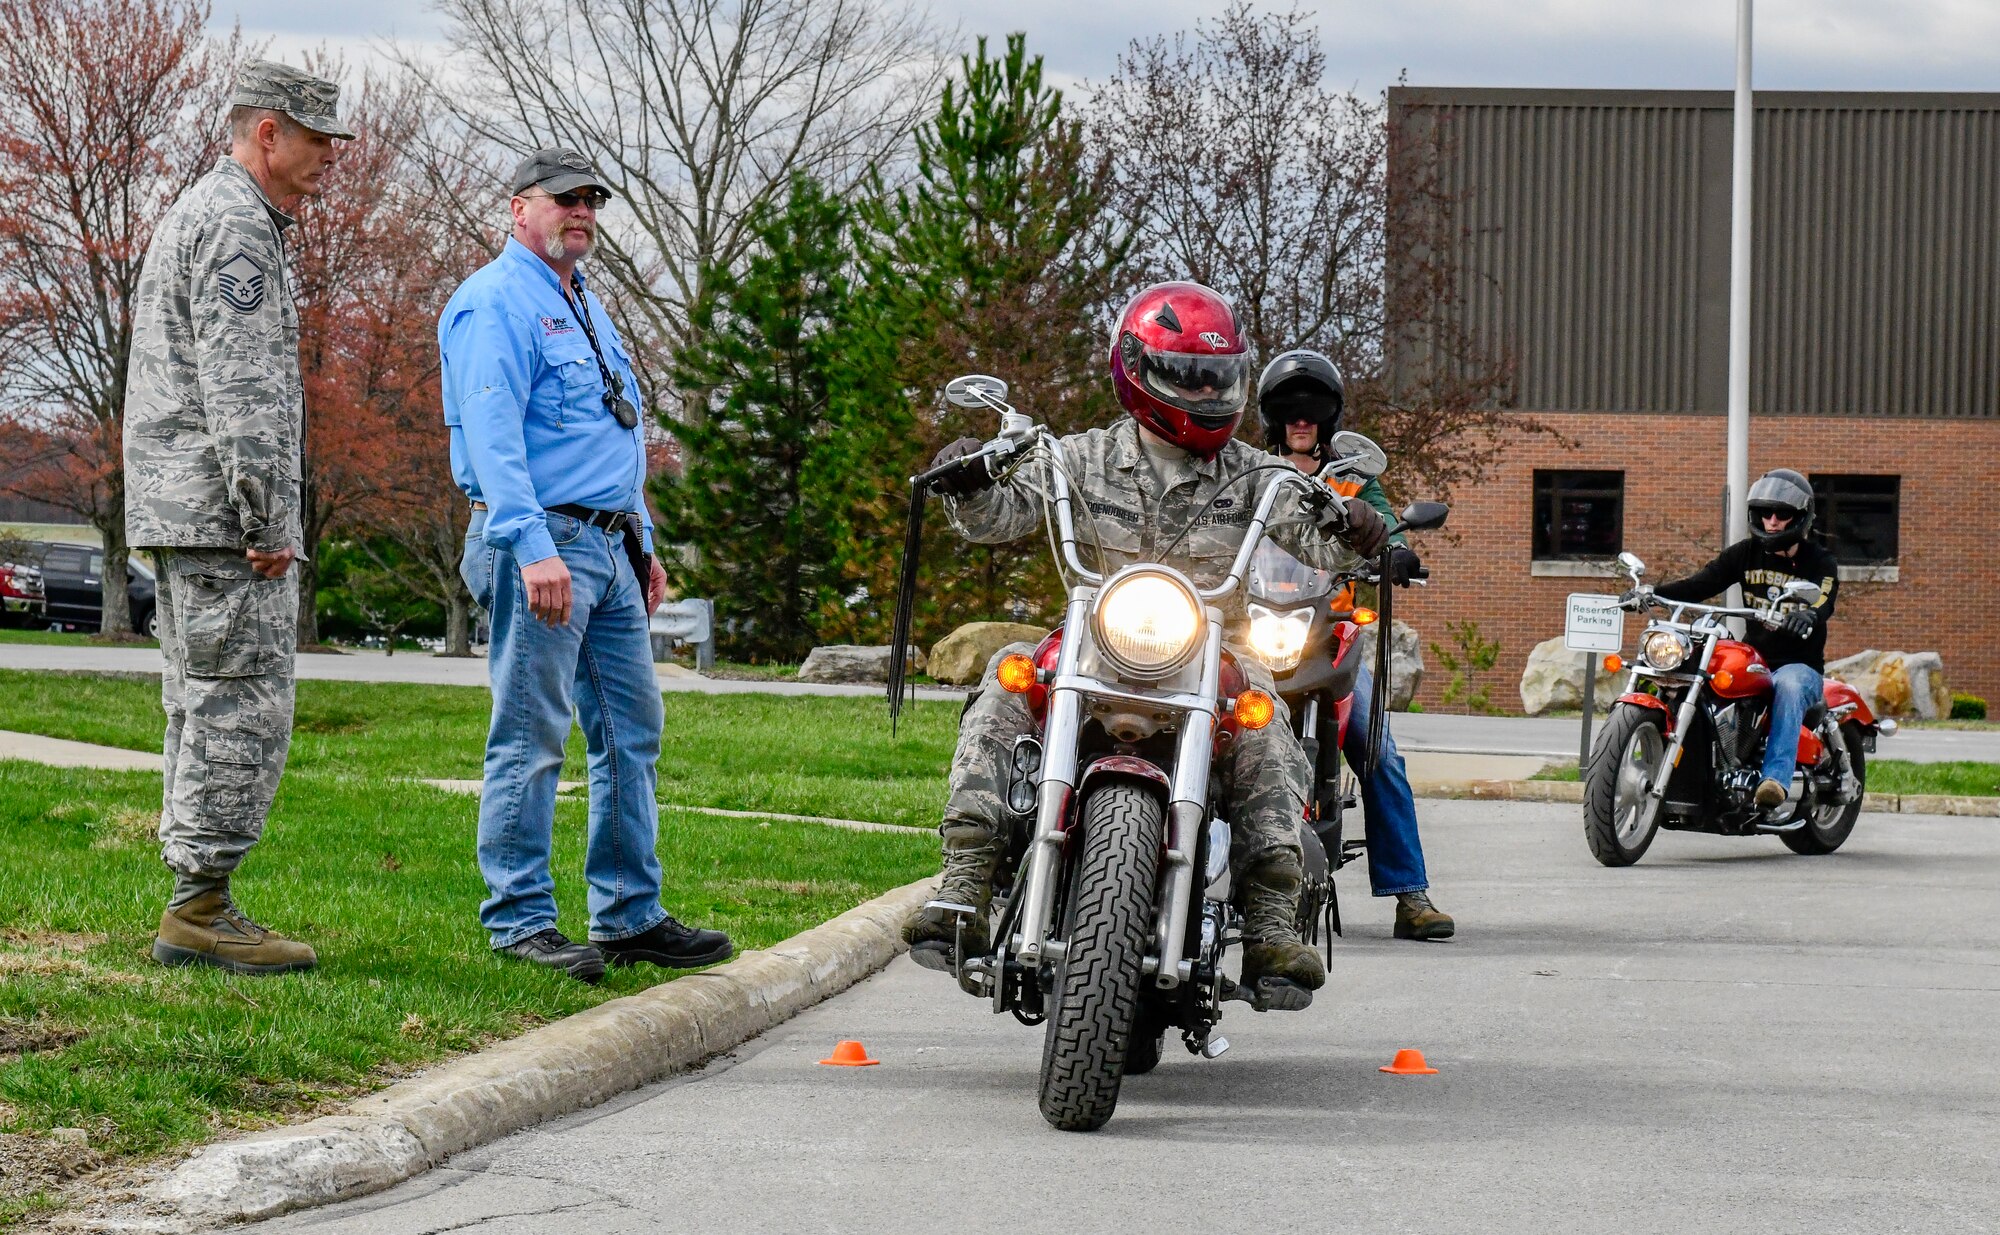 Andy Ford, occupational safety manager assigned to the 910th Airlift Wing, and Master Sgt. Phil Walsh, aircrew flight supervisor assigned to the 910th Operations Support Squadron, observe motorcycle safety course participants on April 12, 2019, at a parking lot in YARS.